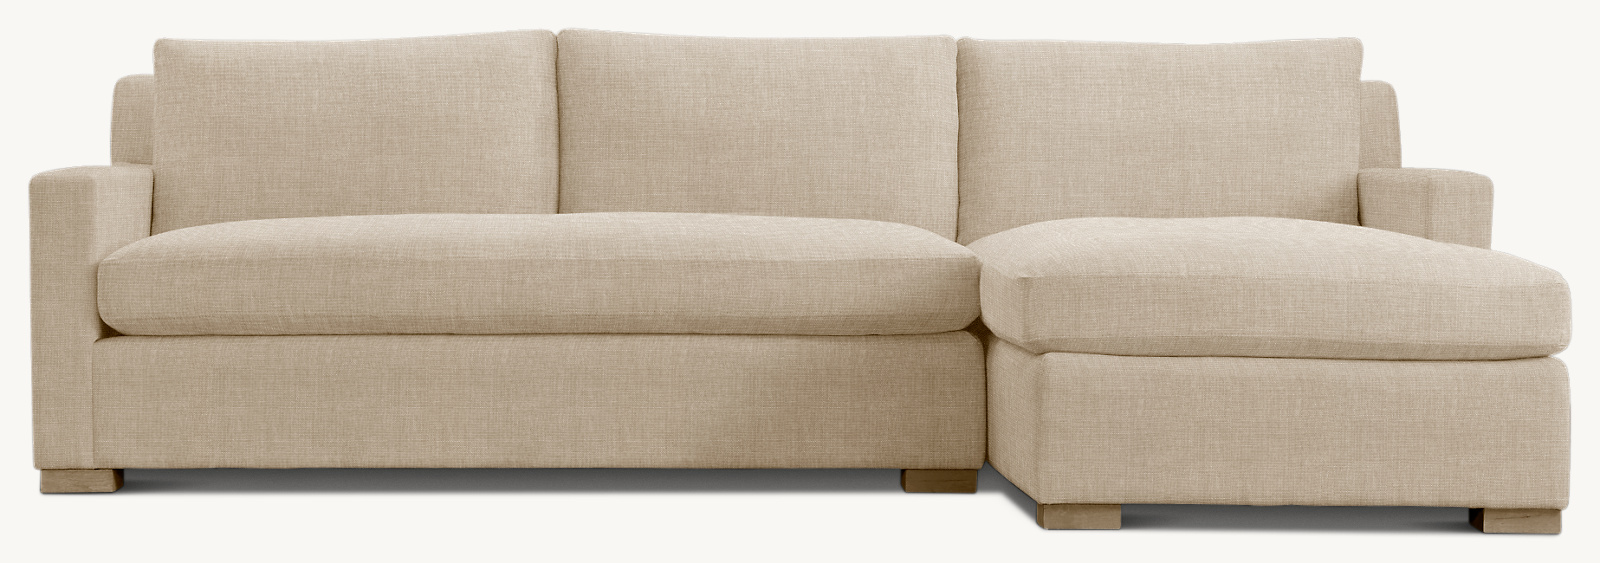 Shown in Sand Belgian Linen; sectional consists of 1 left-arm sofa and 1 right-arm chaise. Cushion configuration may vary by component.